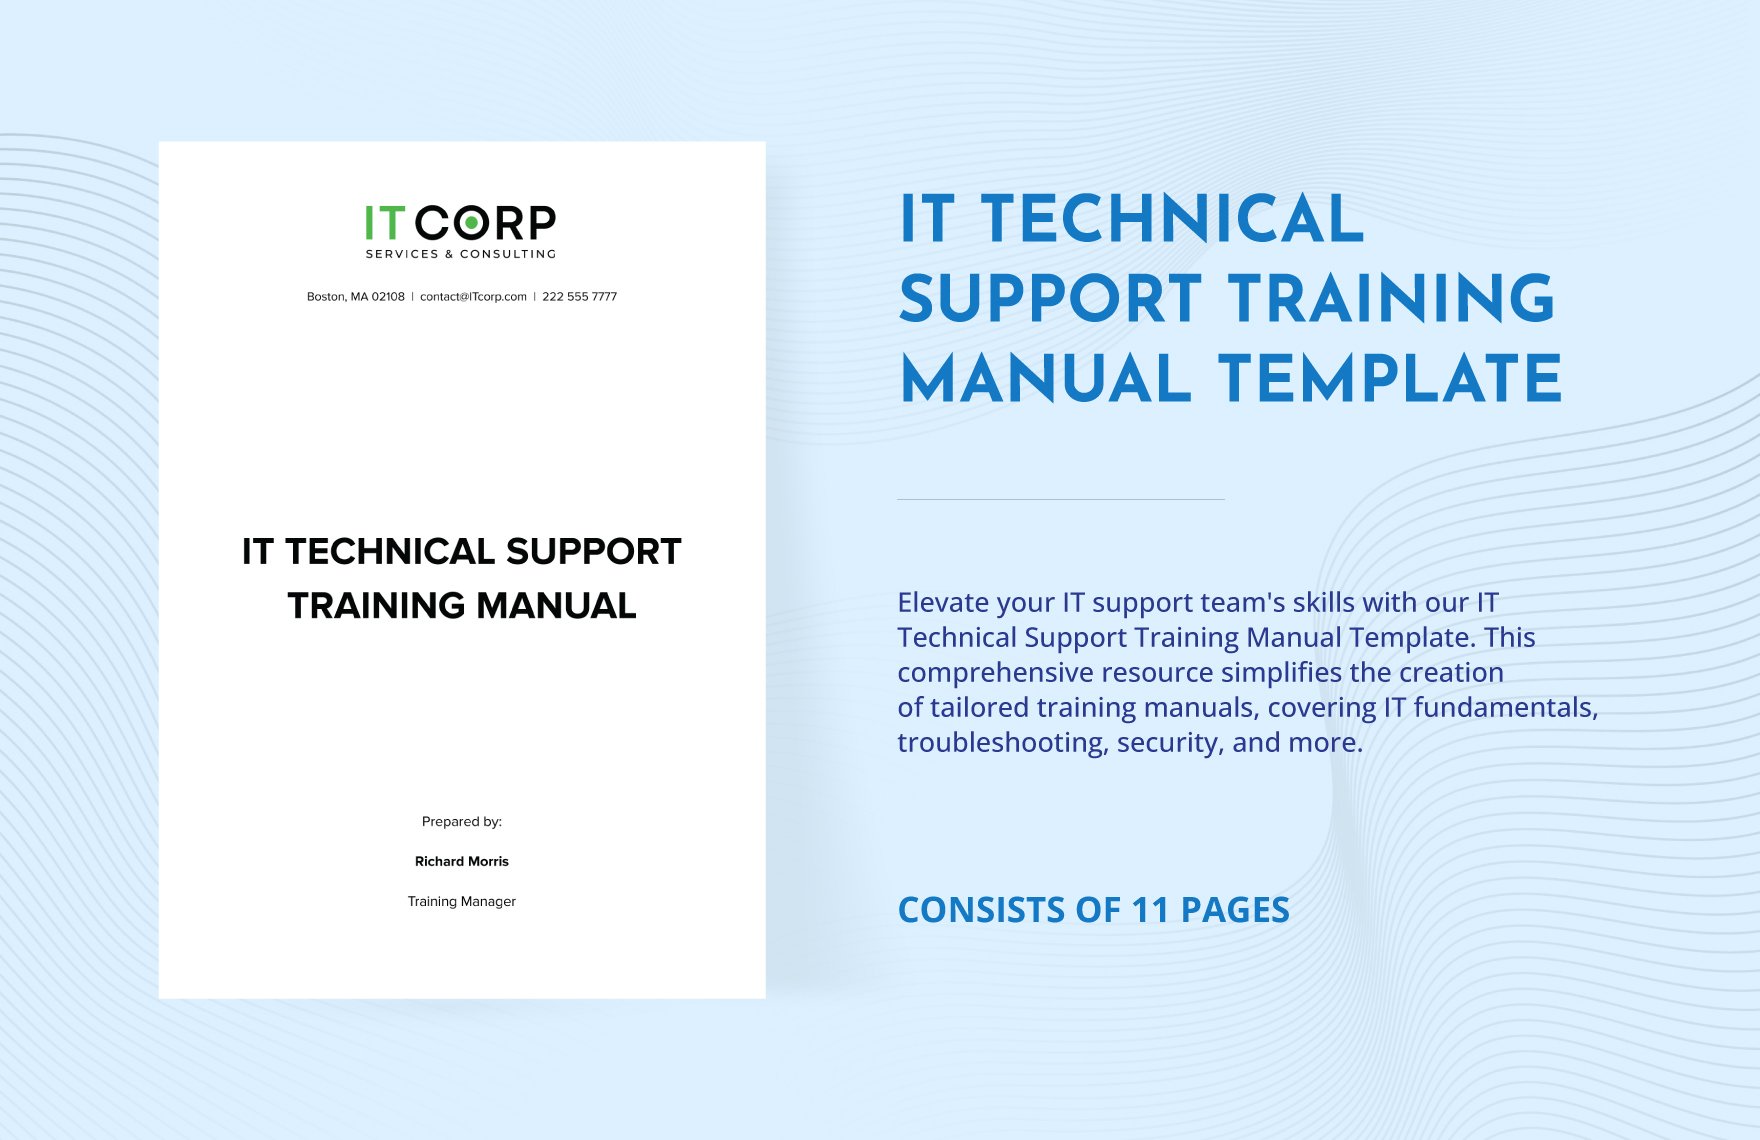 IT Technical Support Training Manual Template